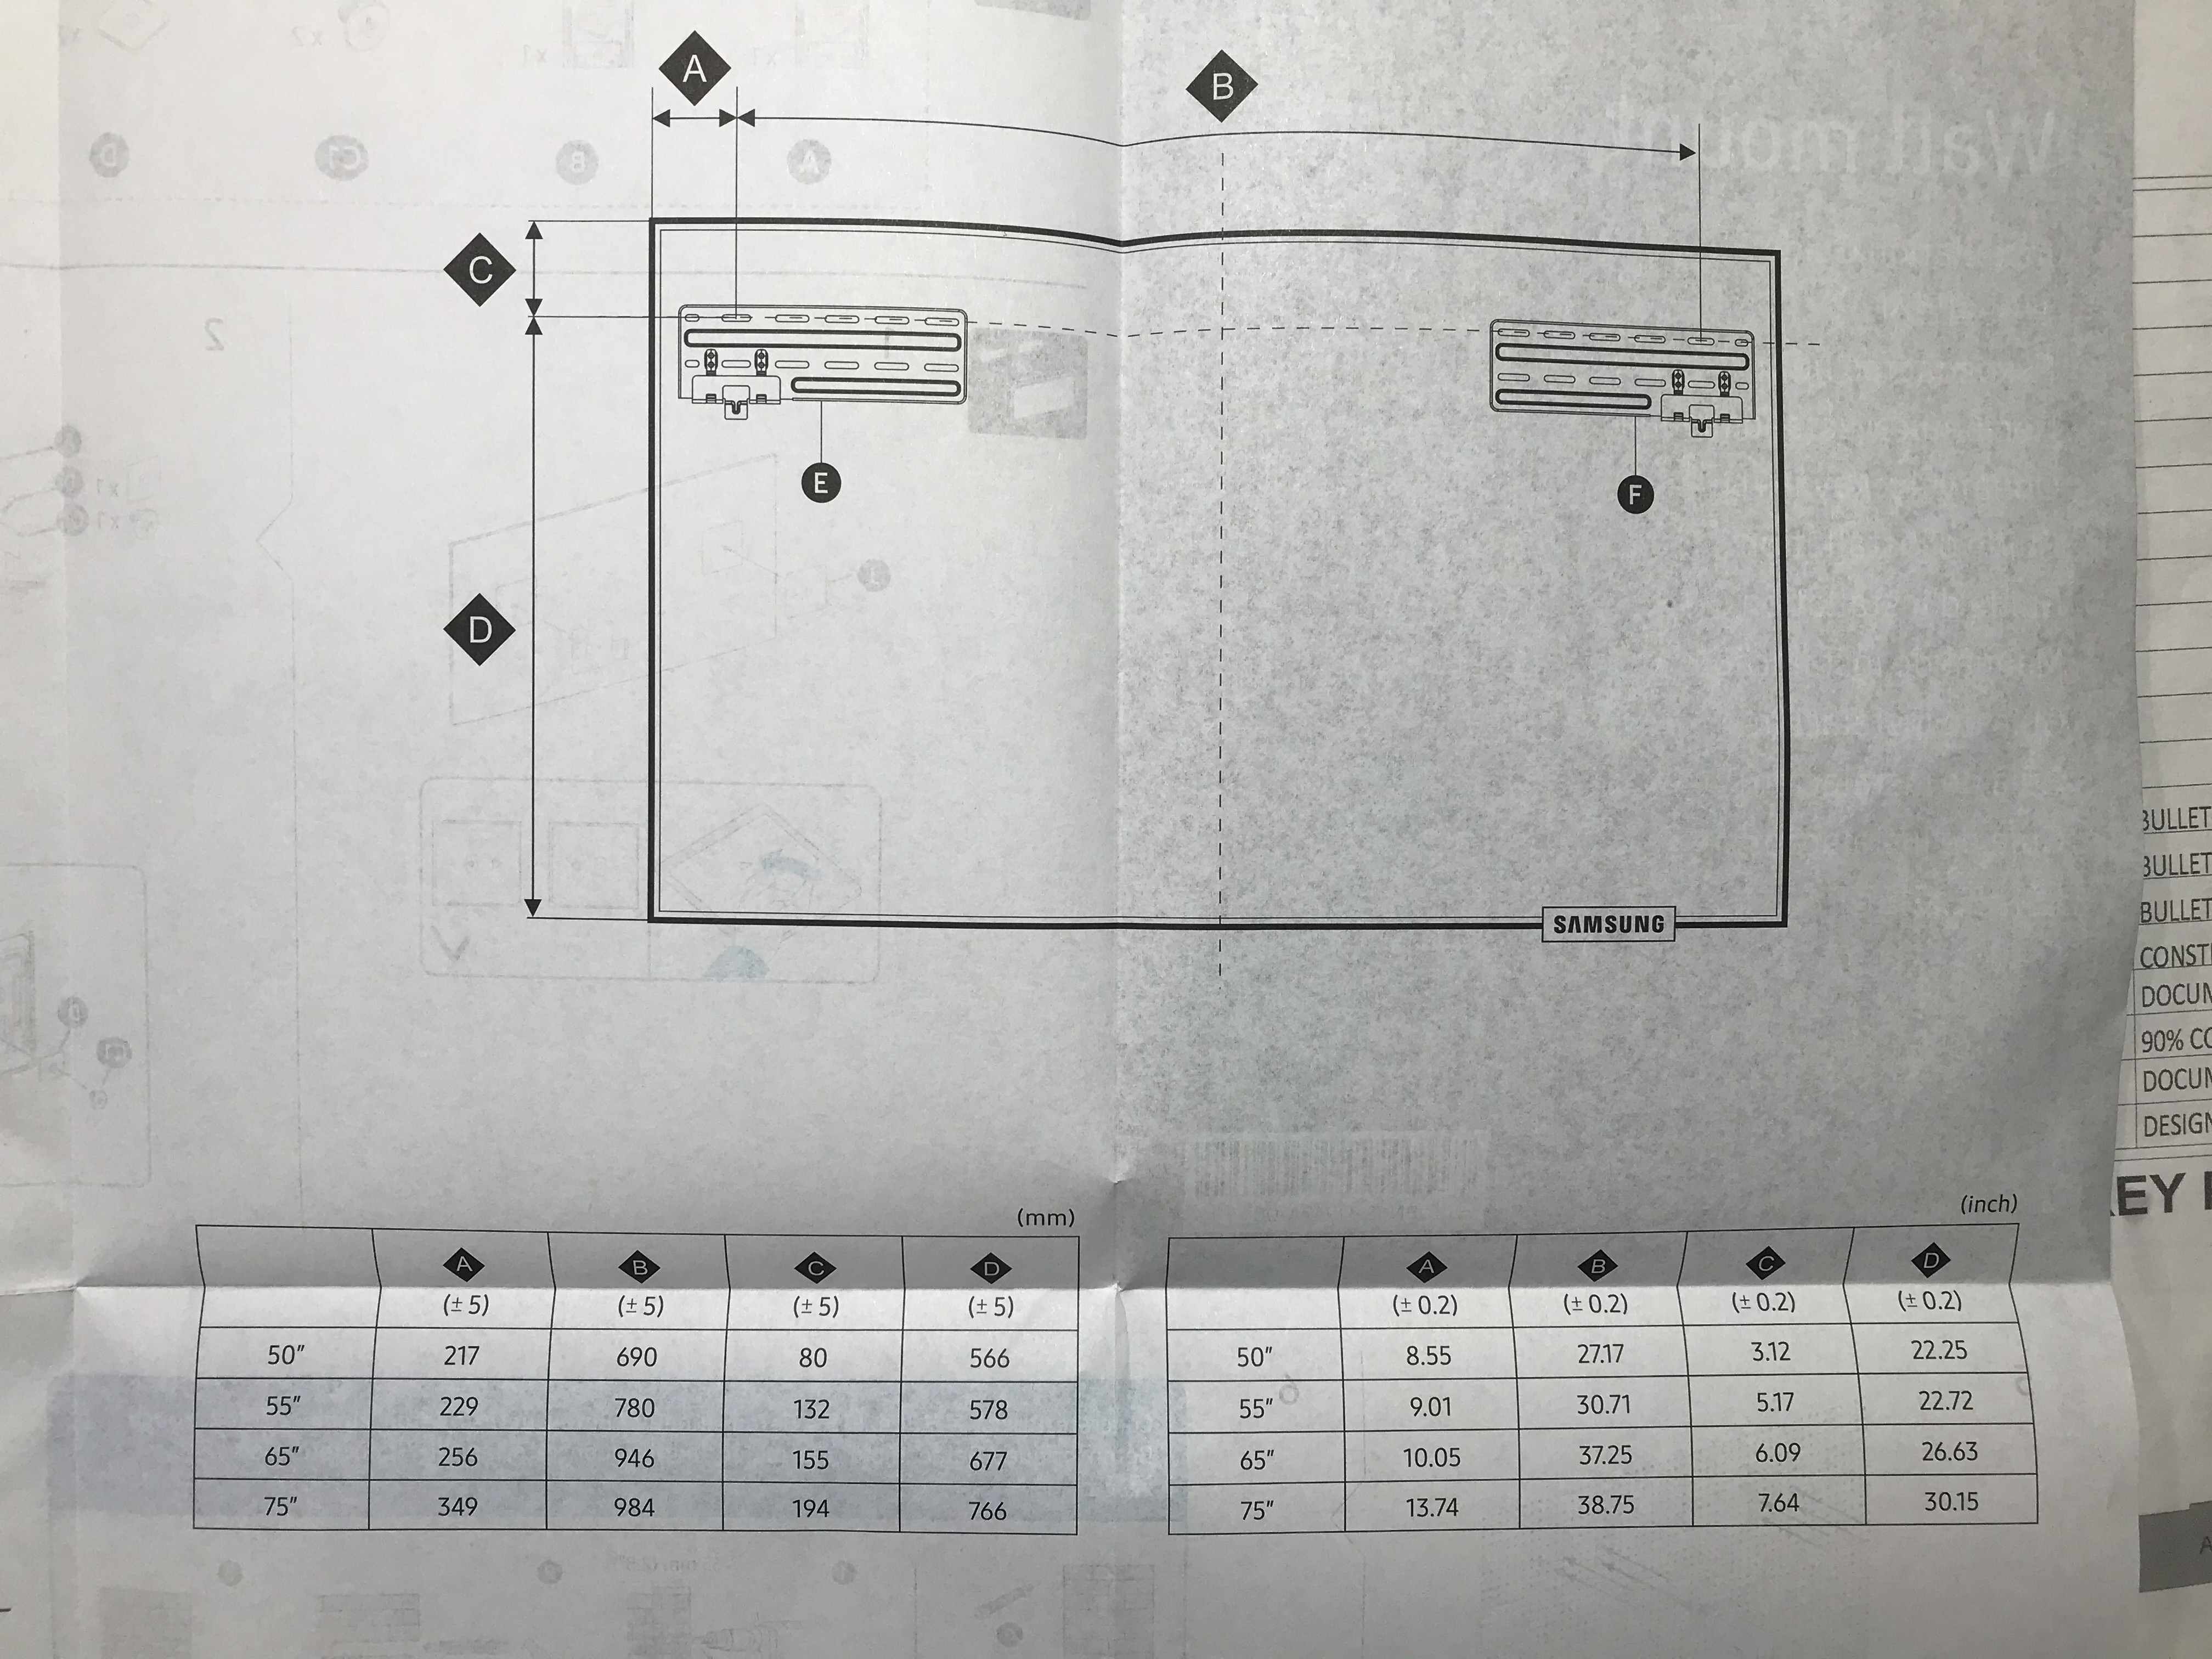 Solved: 2021 Frame TV mounting dimensions for 55 inch Samsung